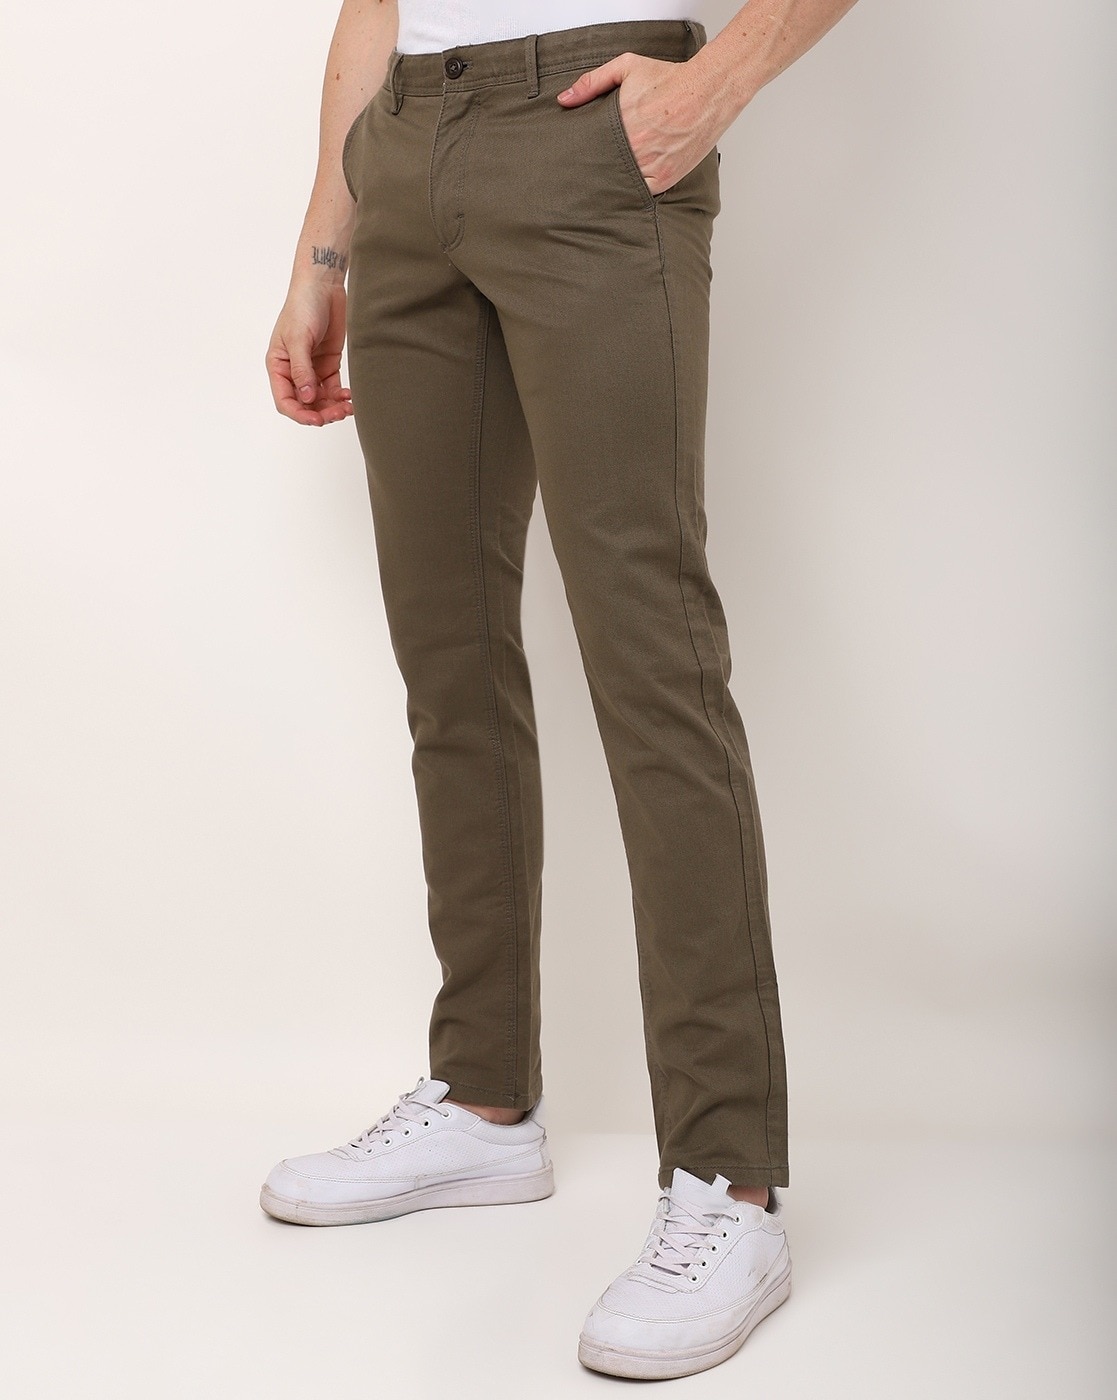 Buy Pink Trousers  Pants for Men by The Indian Garage Co Online  Ajiocom